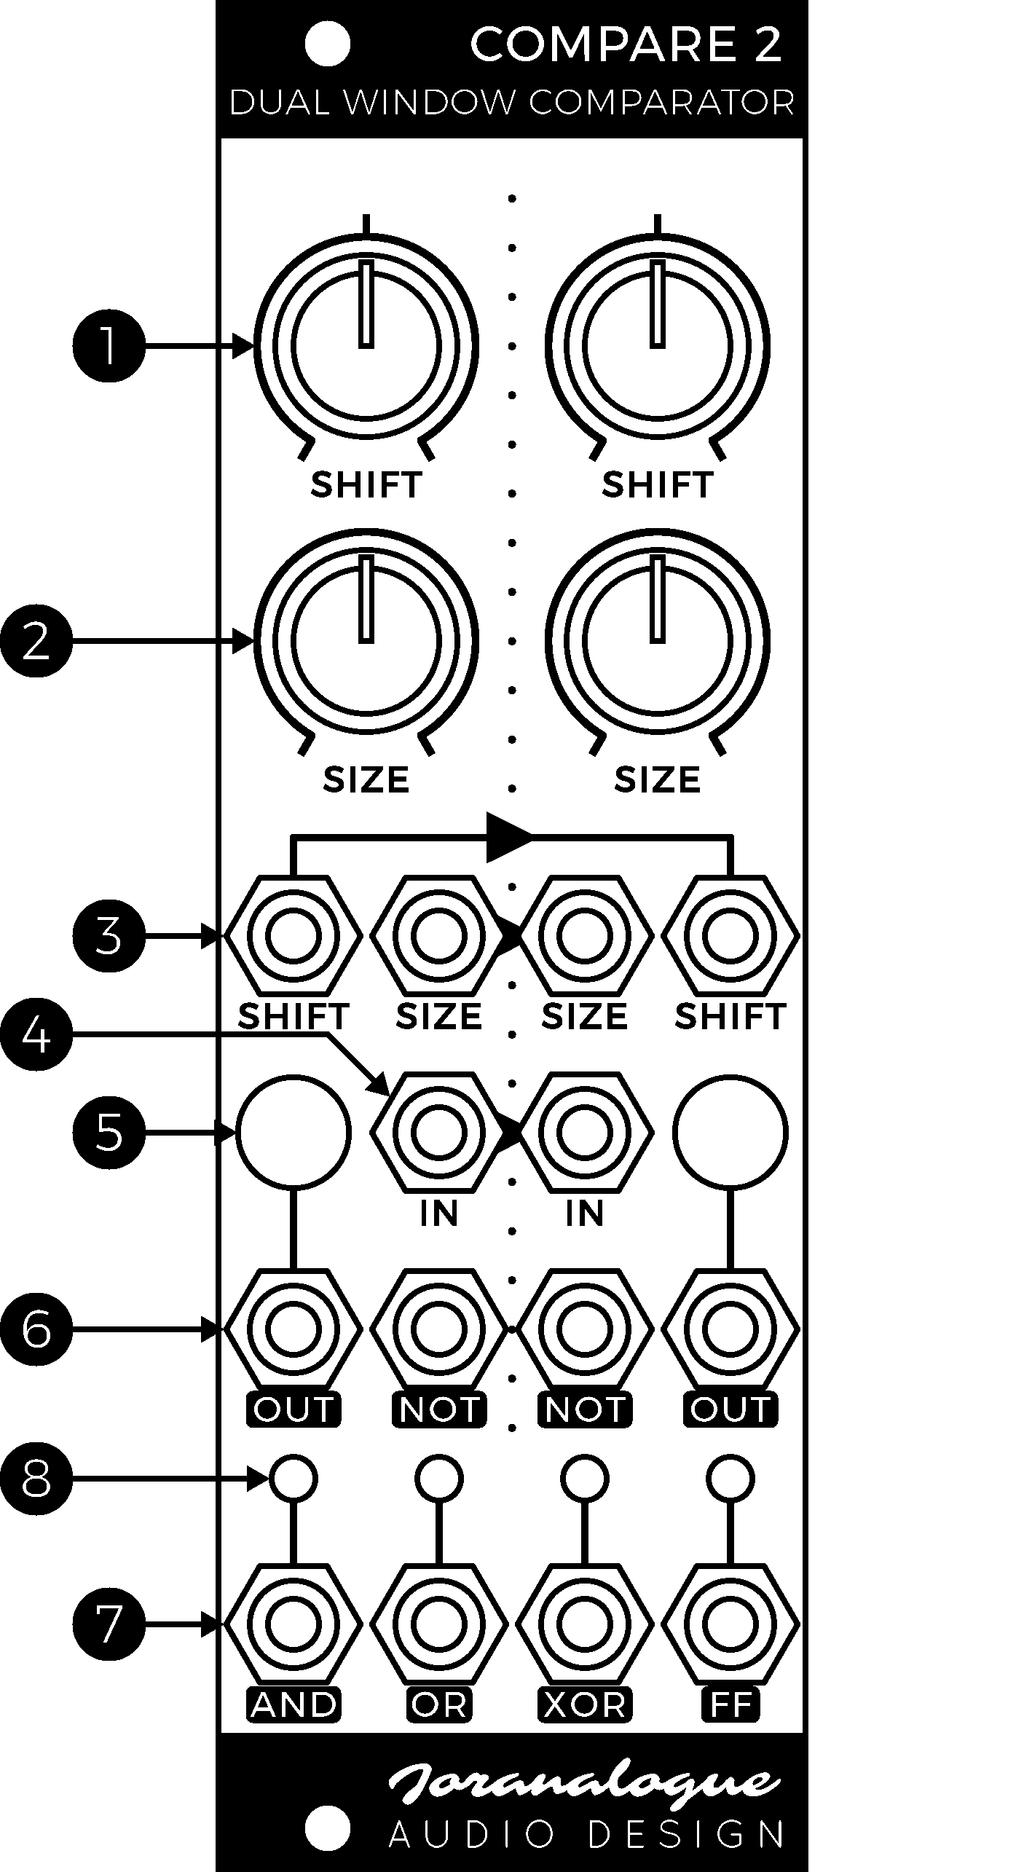 CONTROLS & CONNECTIONS 1 SHIFT KNOBS Each of the identical window comparators features a knob to offset the window s centre. The range is 5 V to +5 V, with 0 V in the centre position.